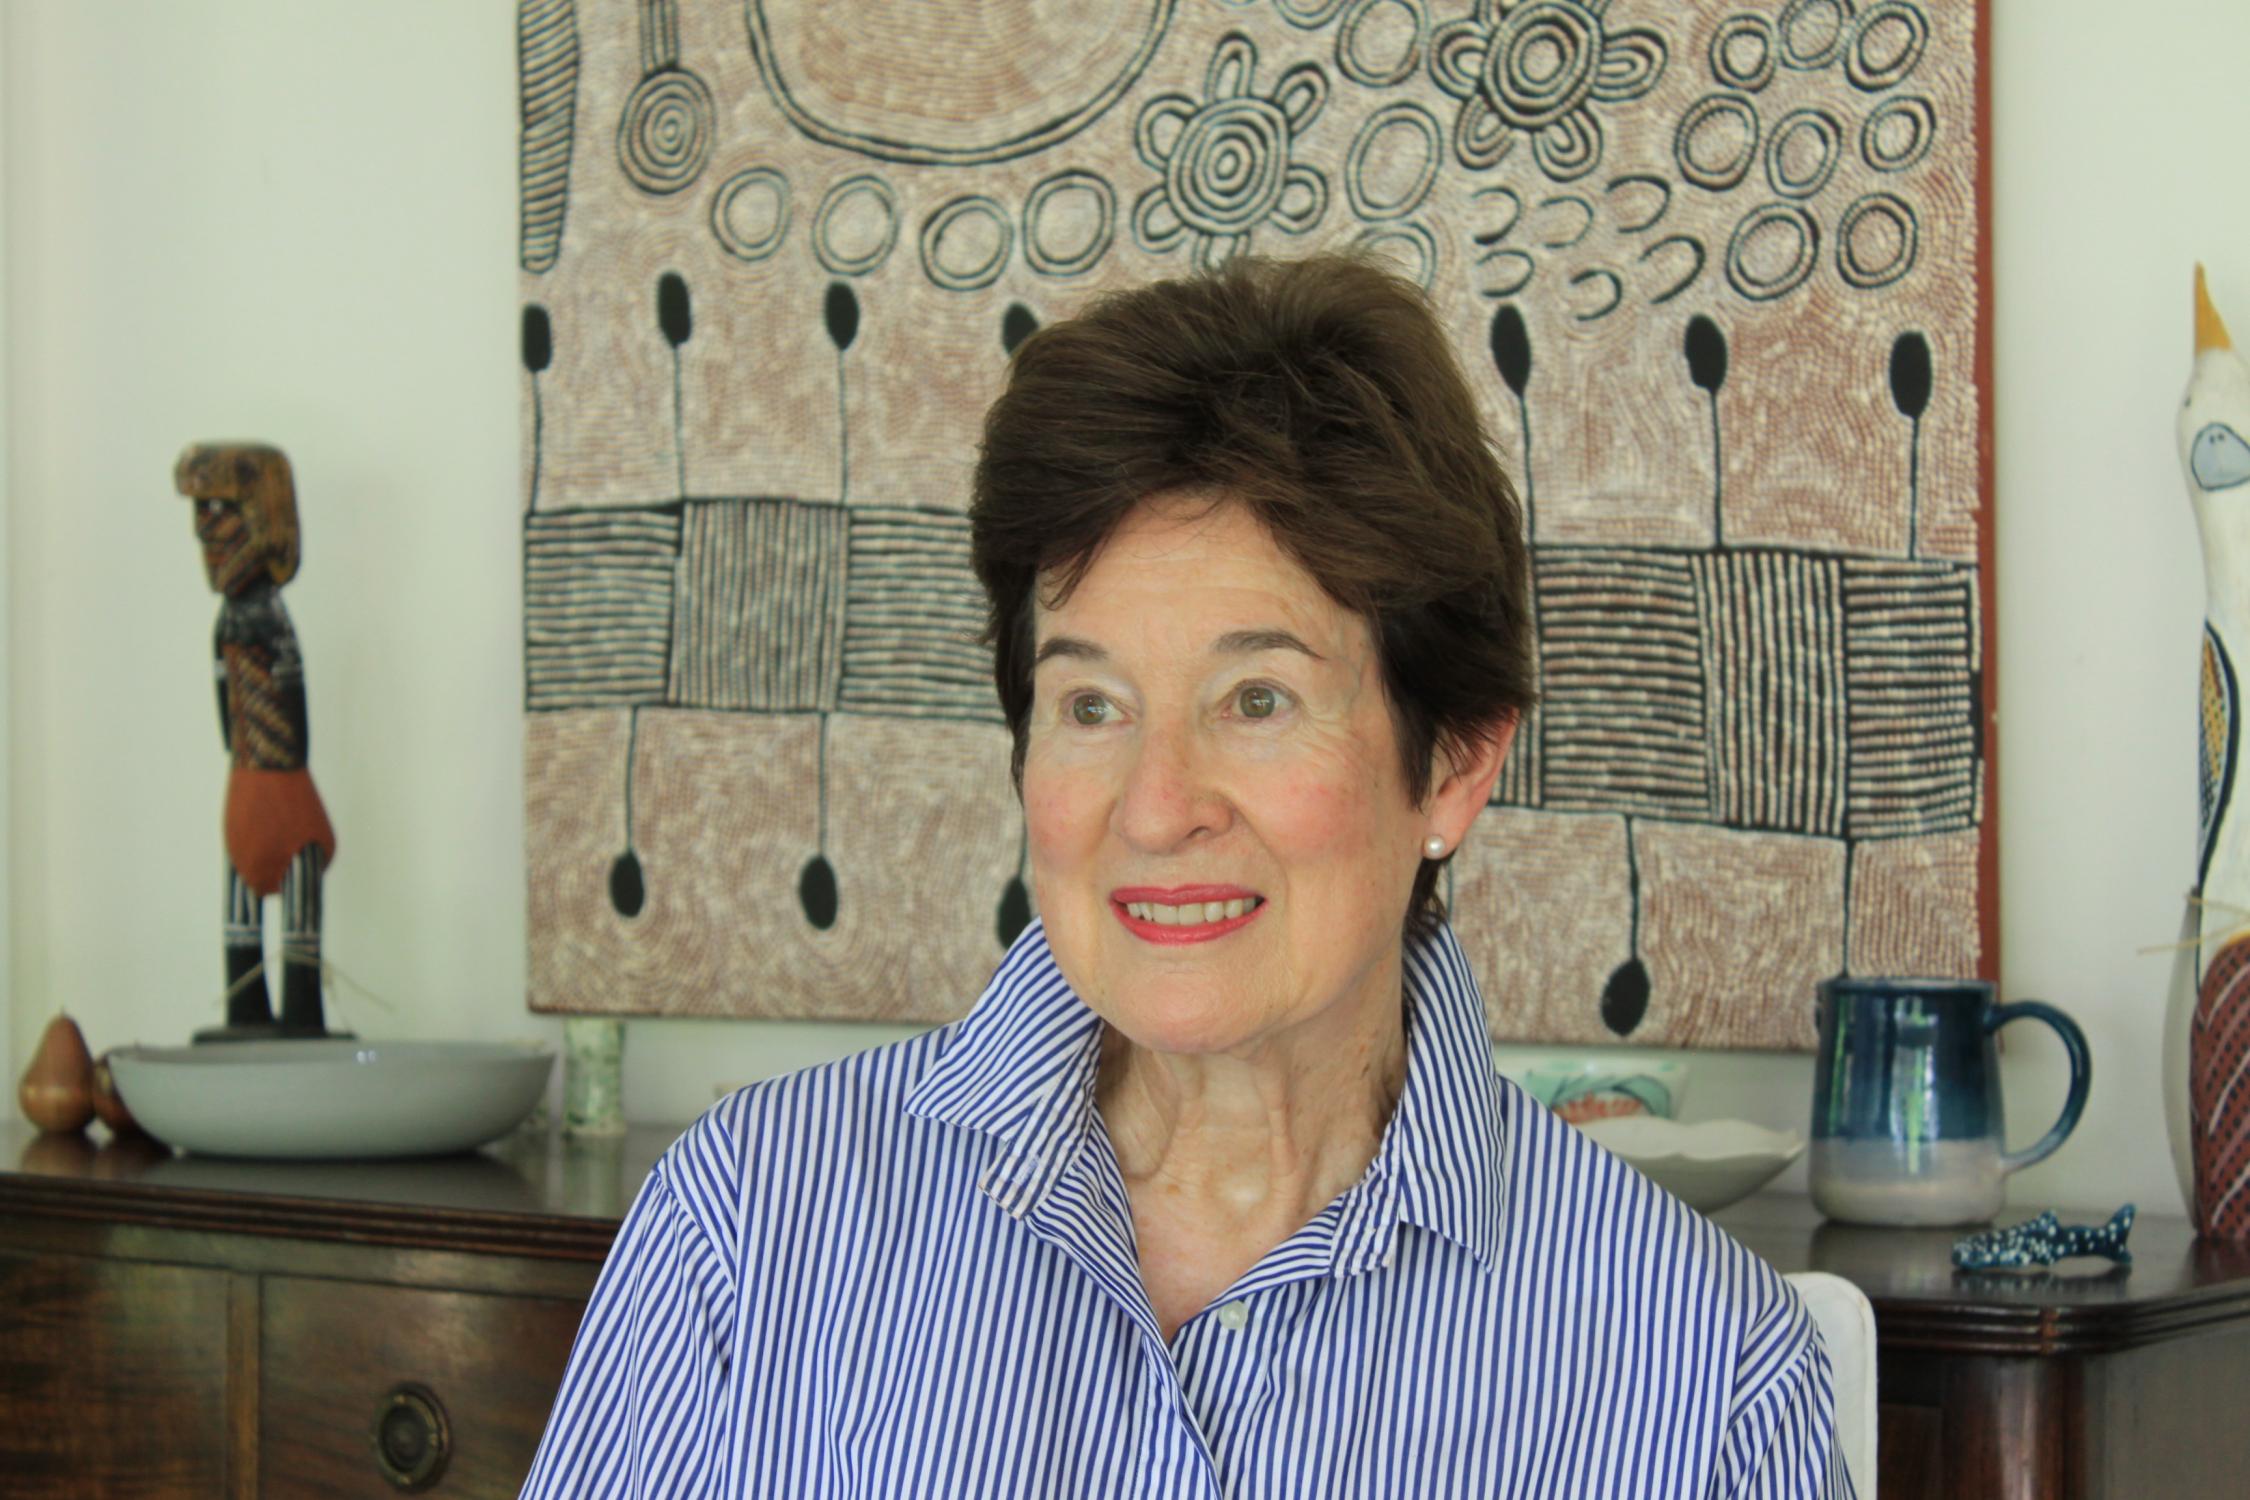 Woman looking to the left of camera wearing stripped blue and white shirt, sitting in front of an Aboriginal artwork